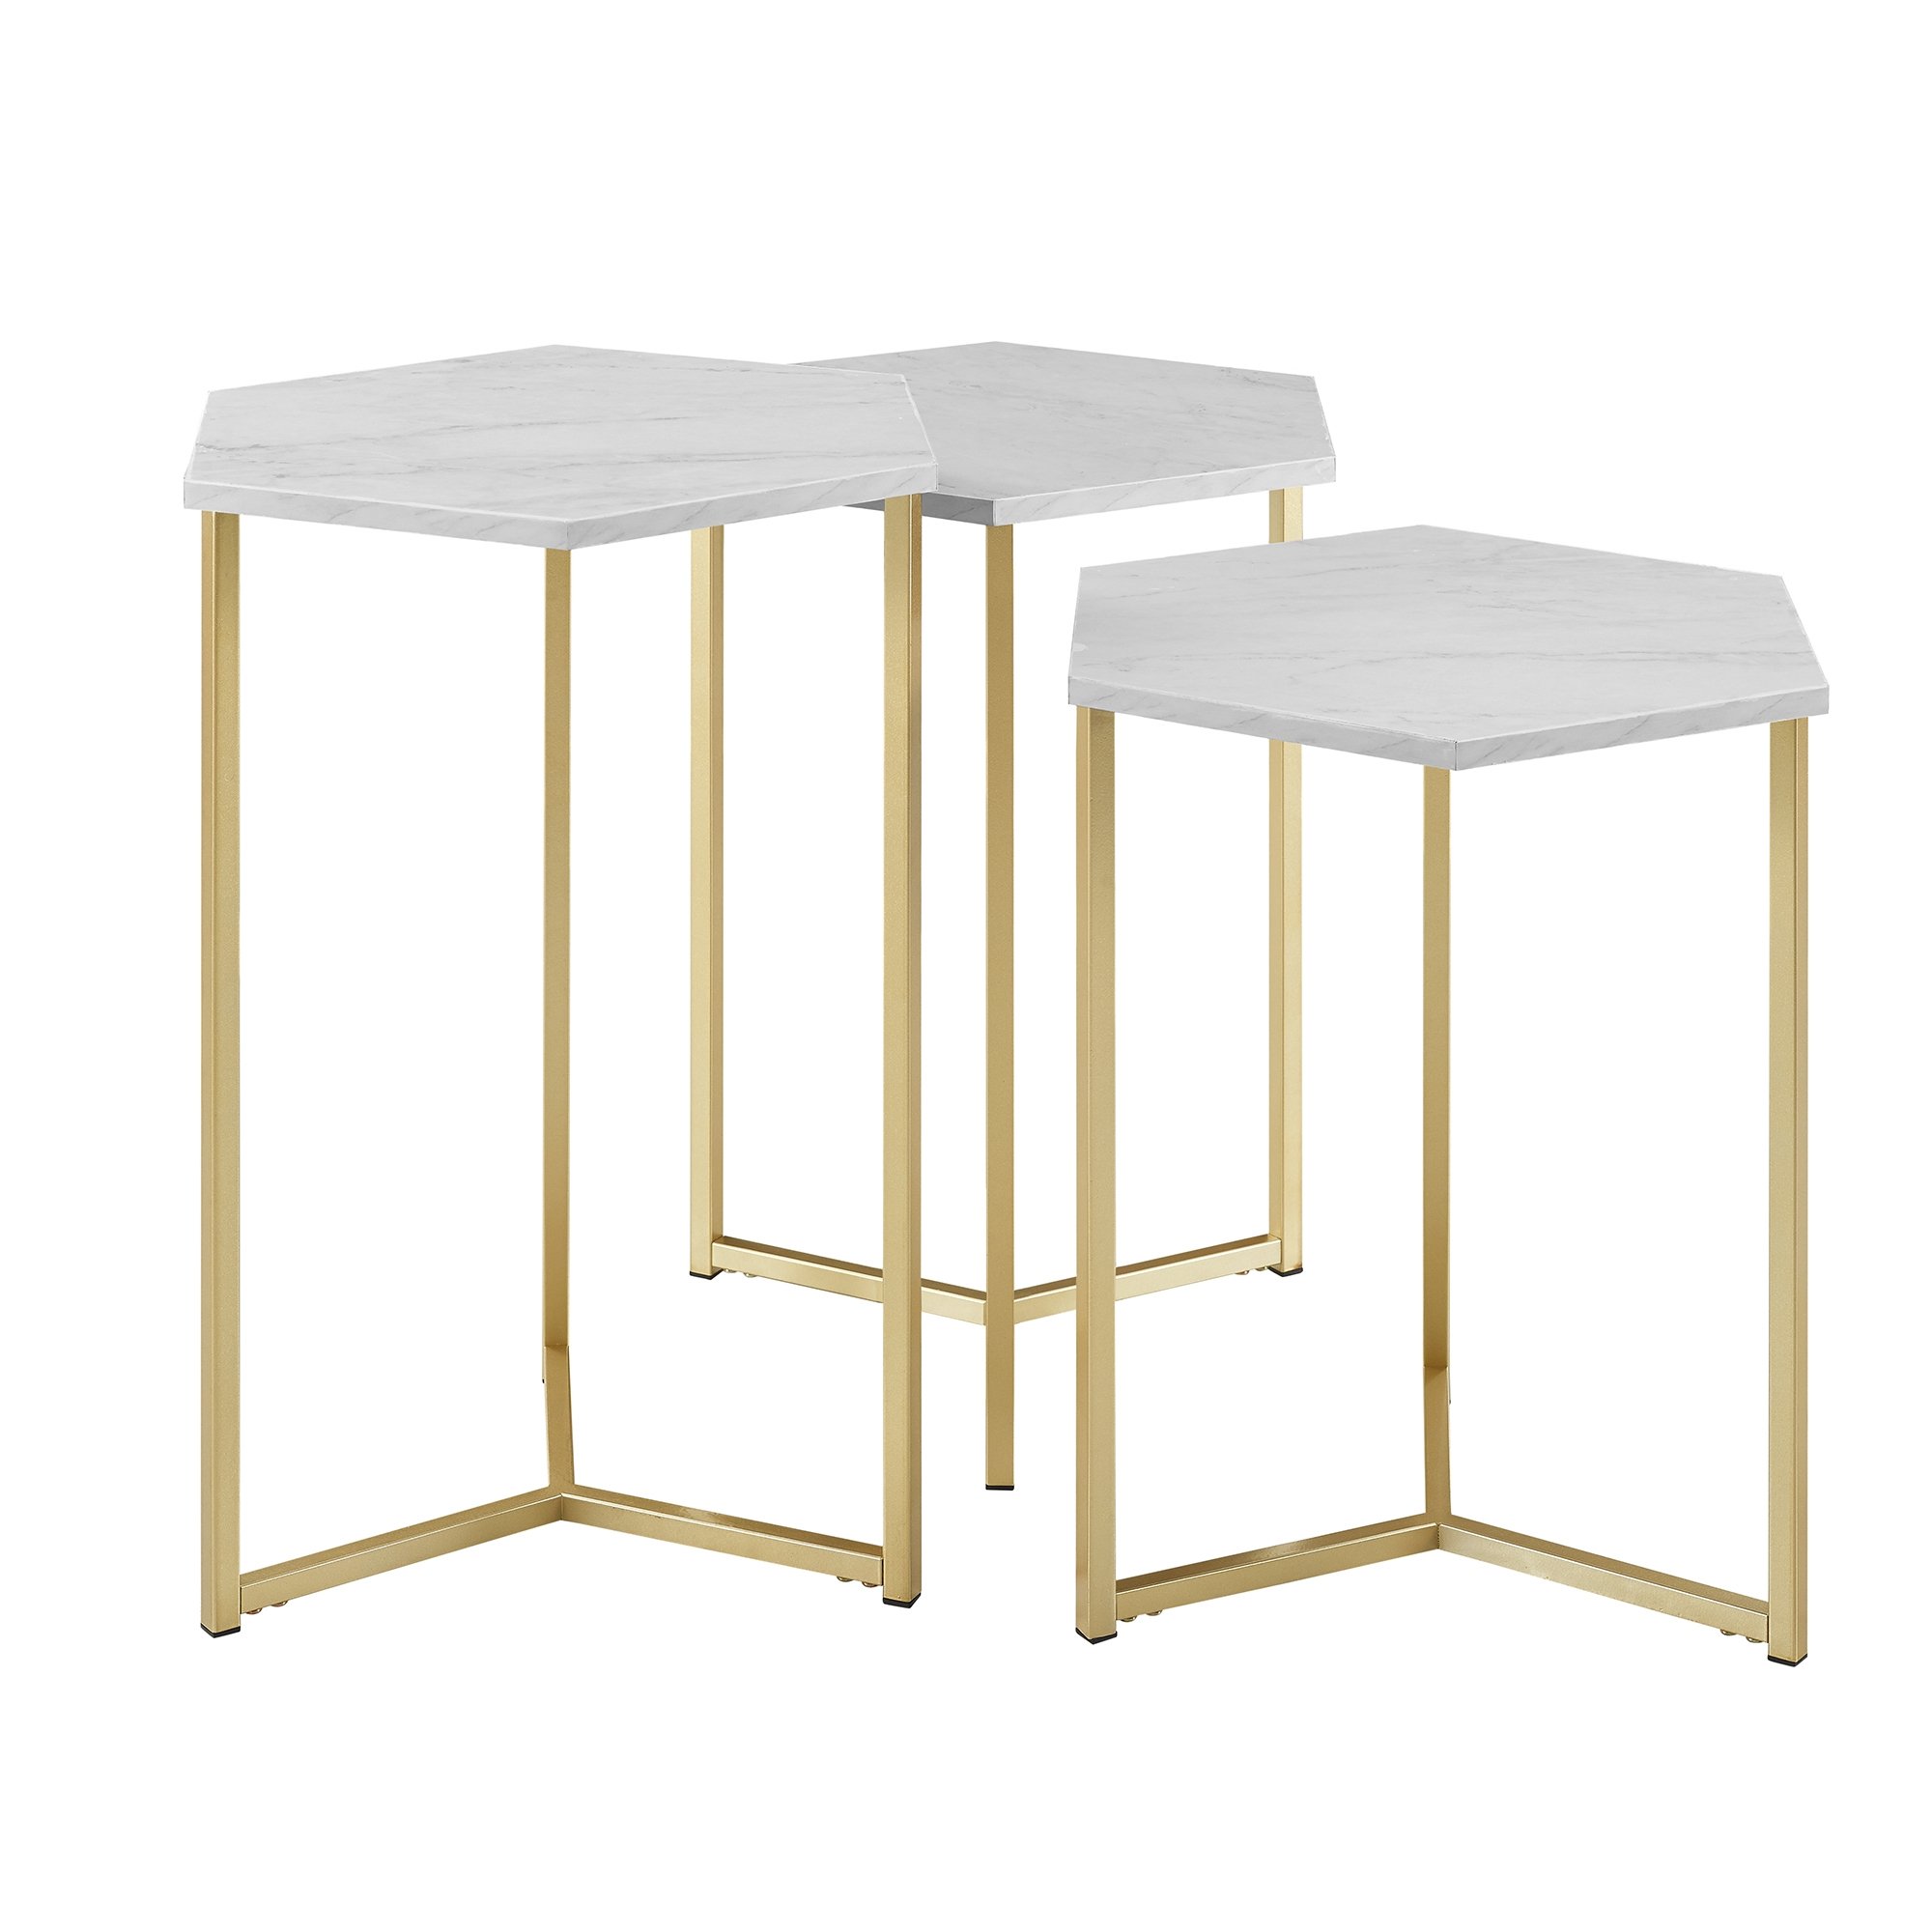 Hexagon Modern Wood Nesting Tables, Set of 3 - Faux White Marble/Gold  - Image 1